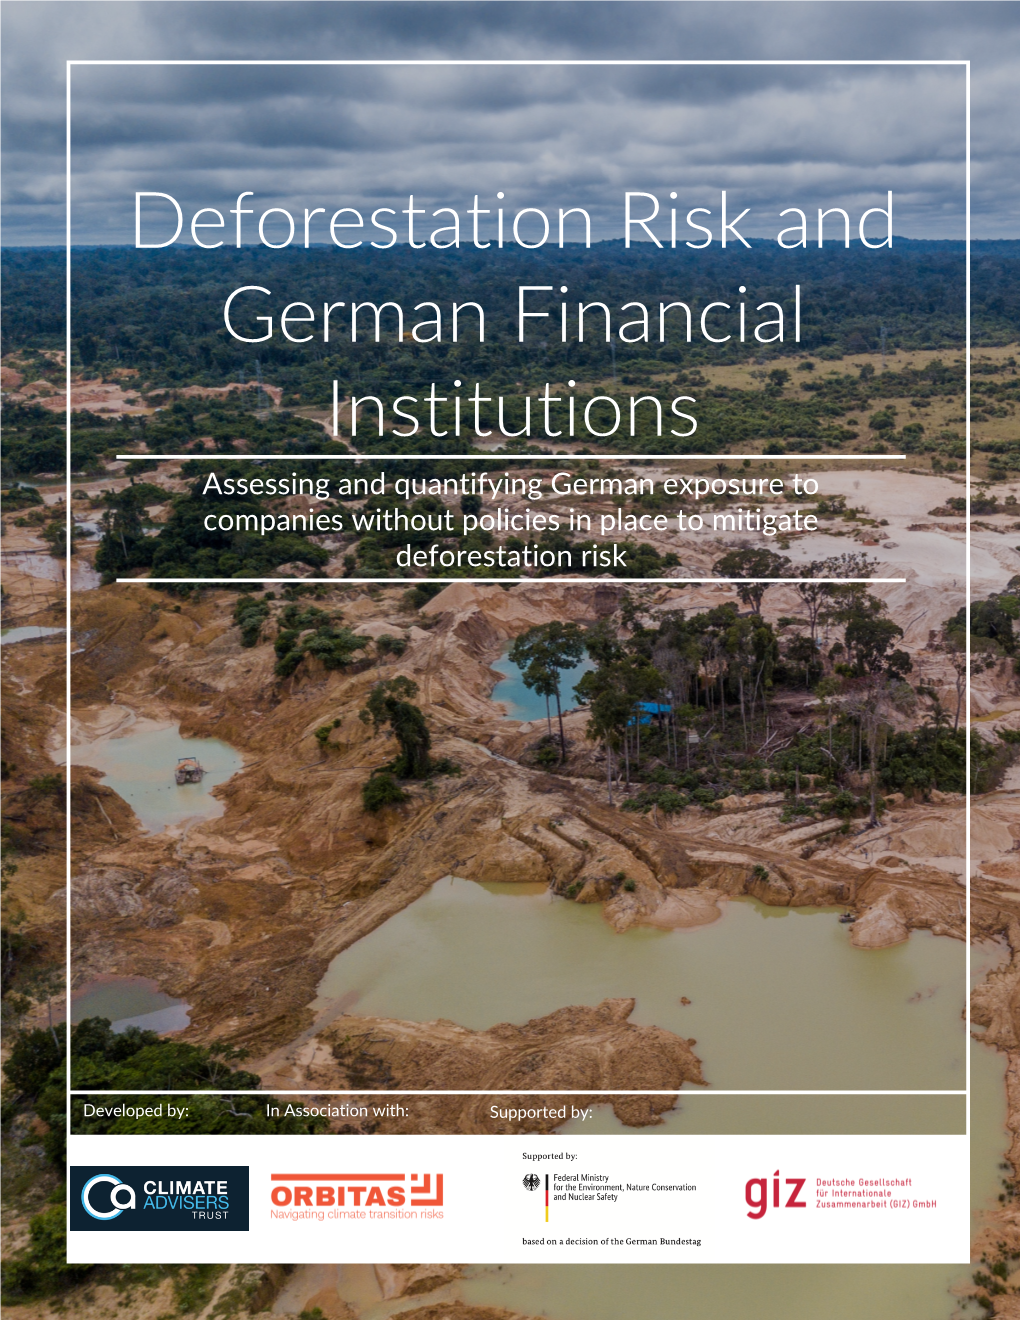 Deforestation Risk and German Financial Institutions Assessing and Quantifying German Exposure to Companies Without Policies in Place to Mitigate Deforestation Risk